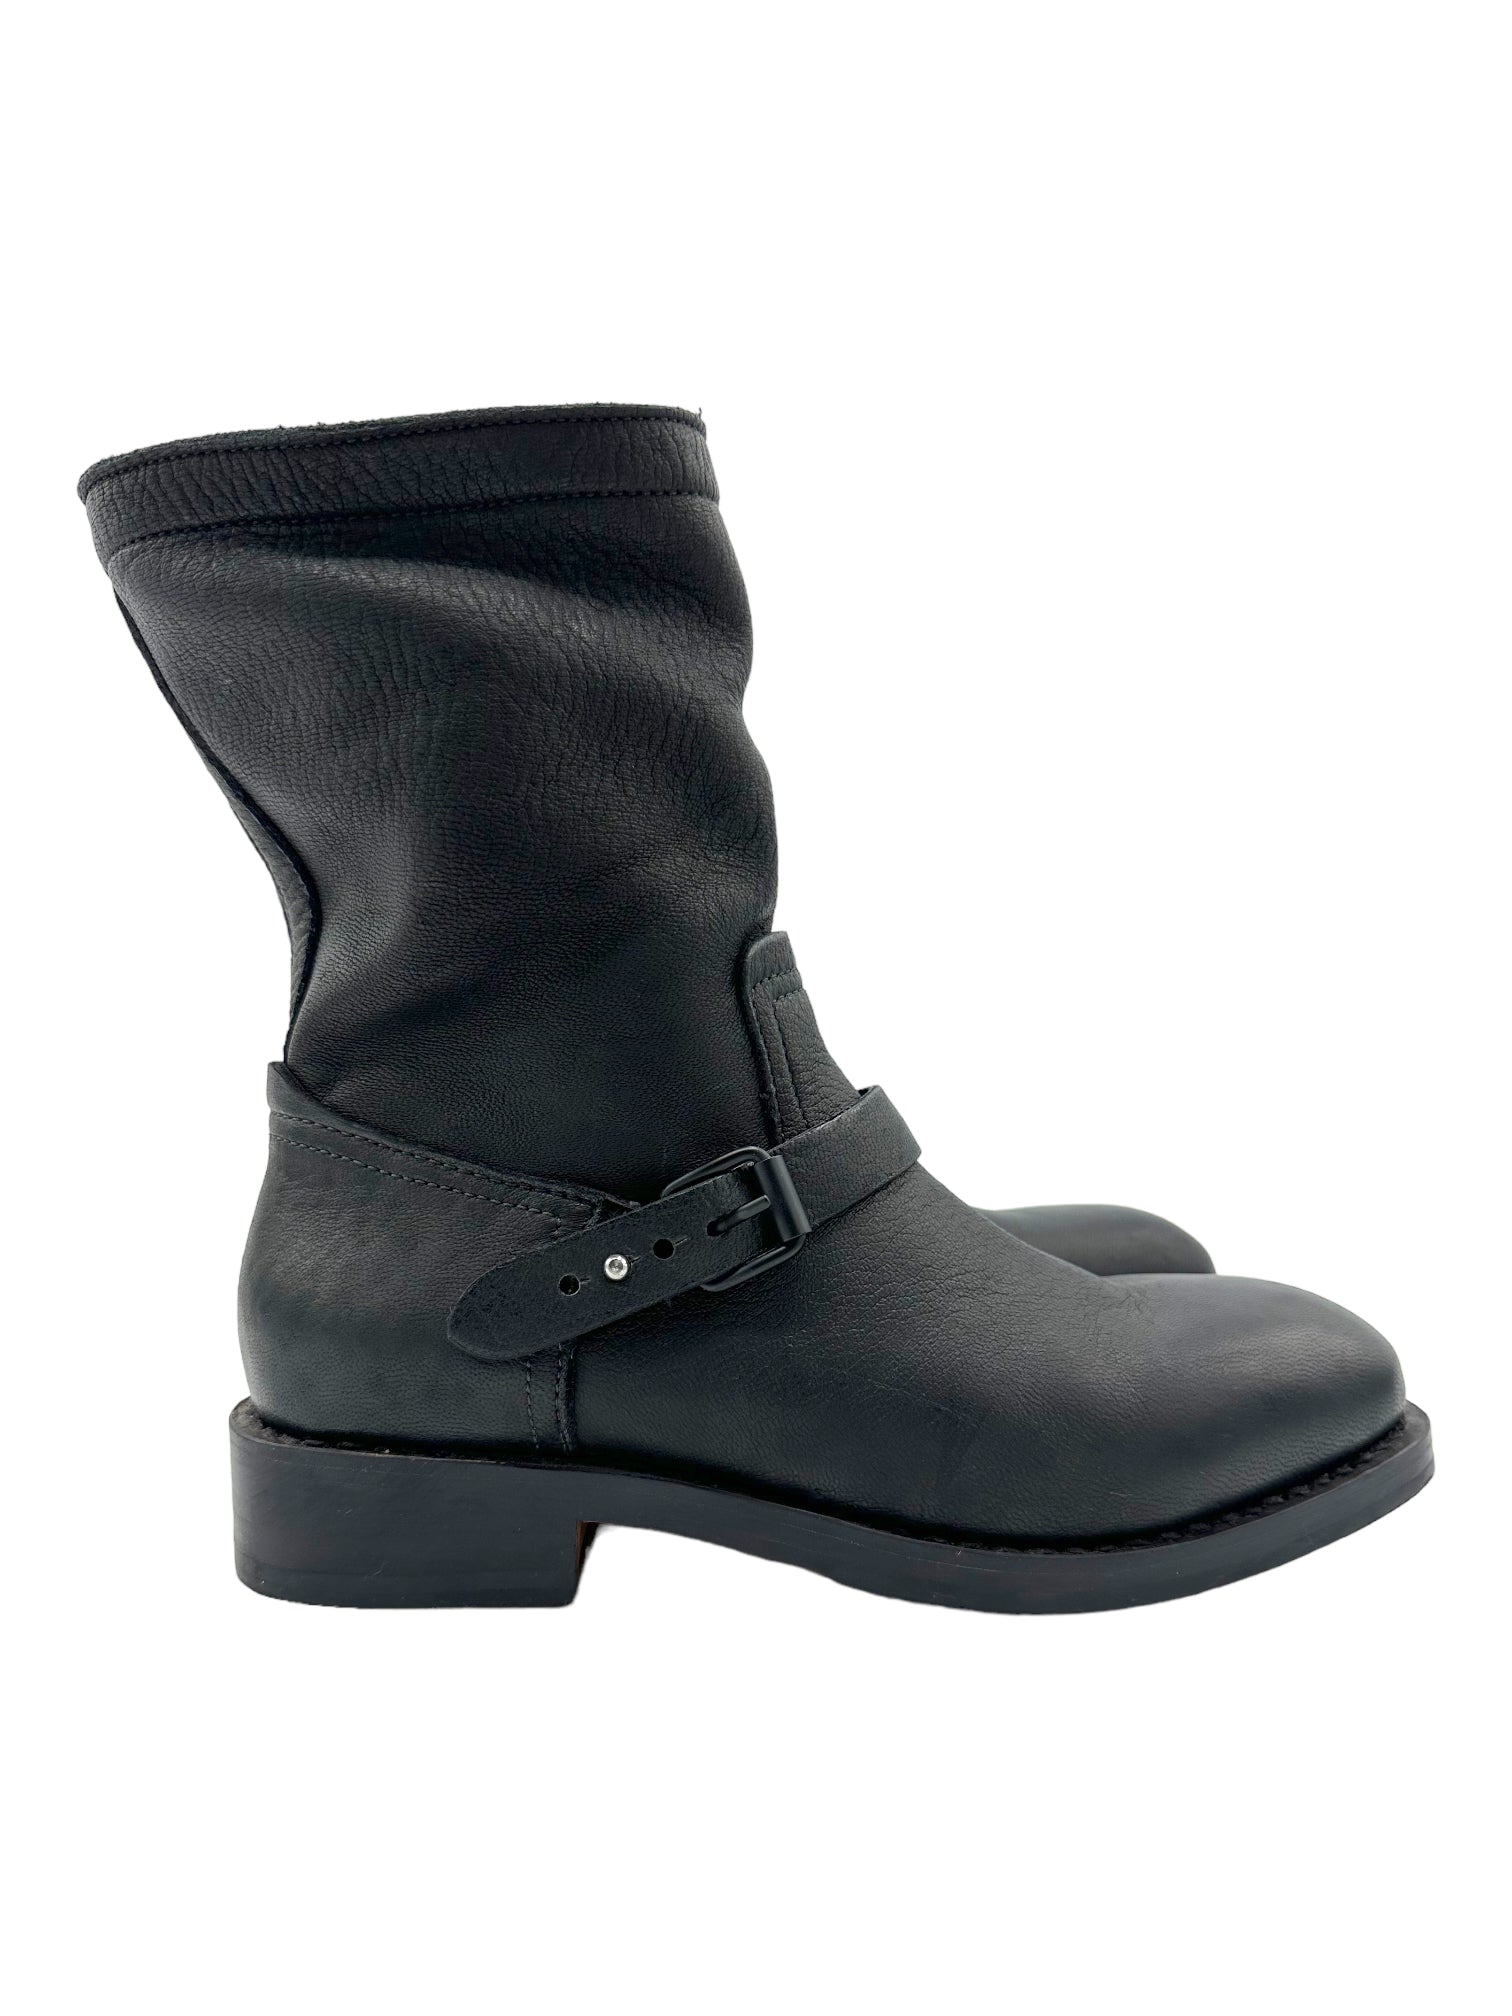 Rag & Bone Black Oliver Moto Boots - Genuine Design Luxury Consignment for Men. New & Pre-Owned Clothing, Shoes, & Accessories. Calgary, Canada